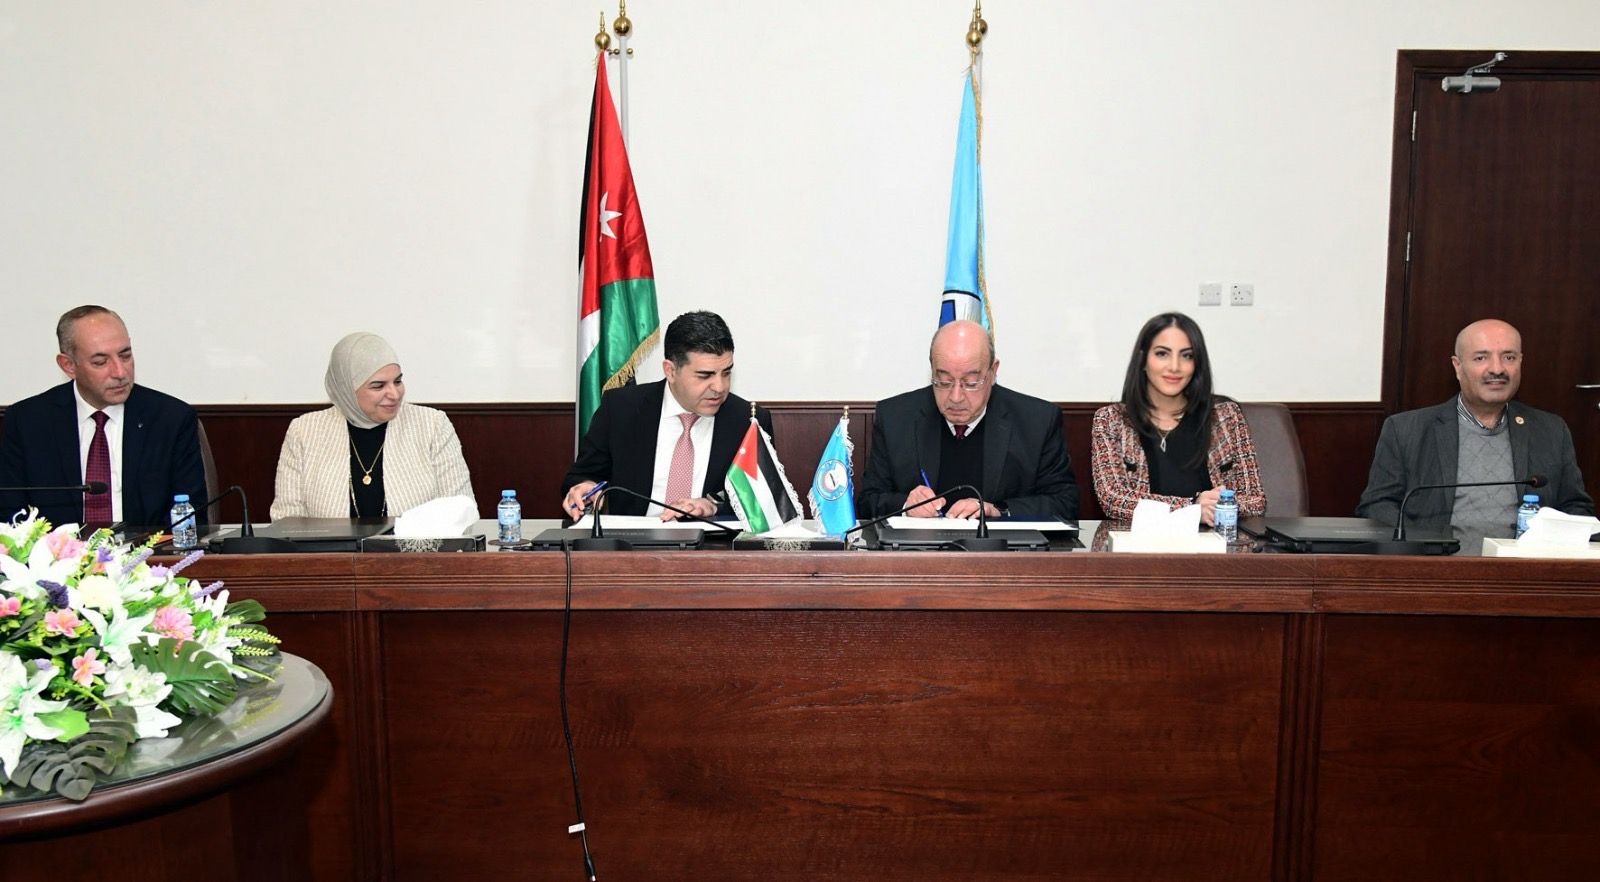  IAPH and the Jordan University of Science and Technology (JUST) Sign a Memorandum of Understanding